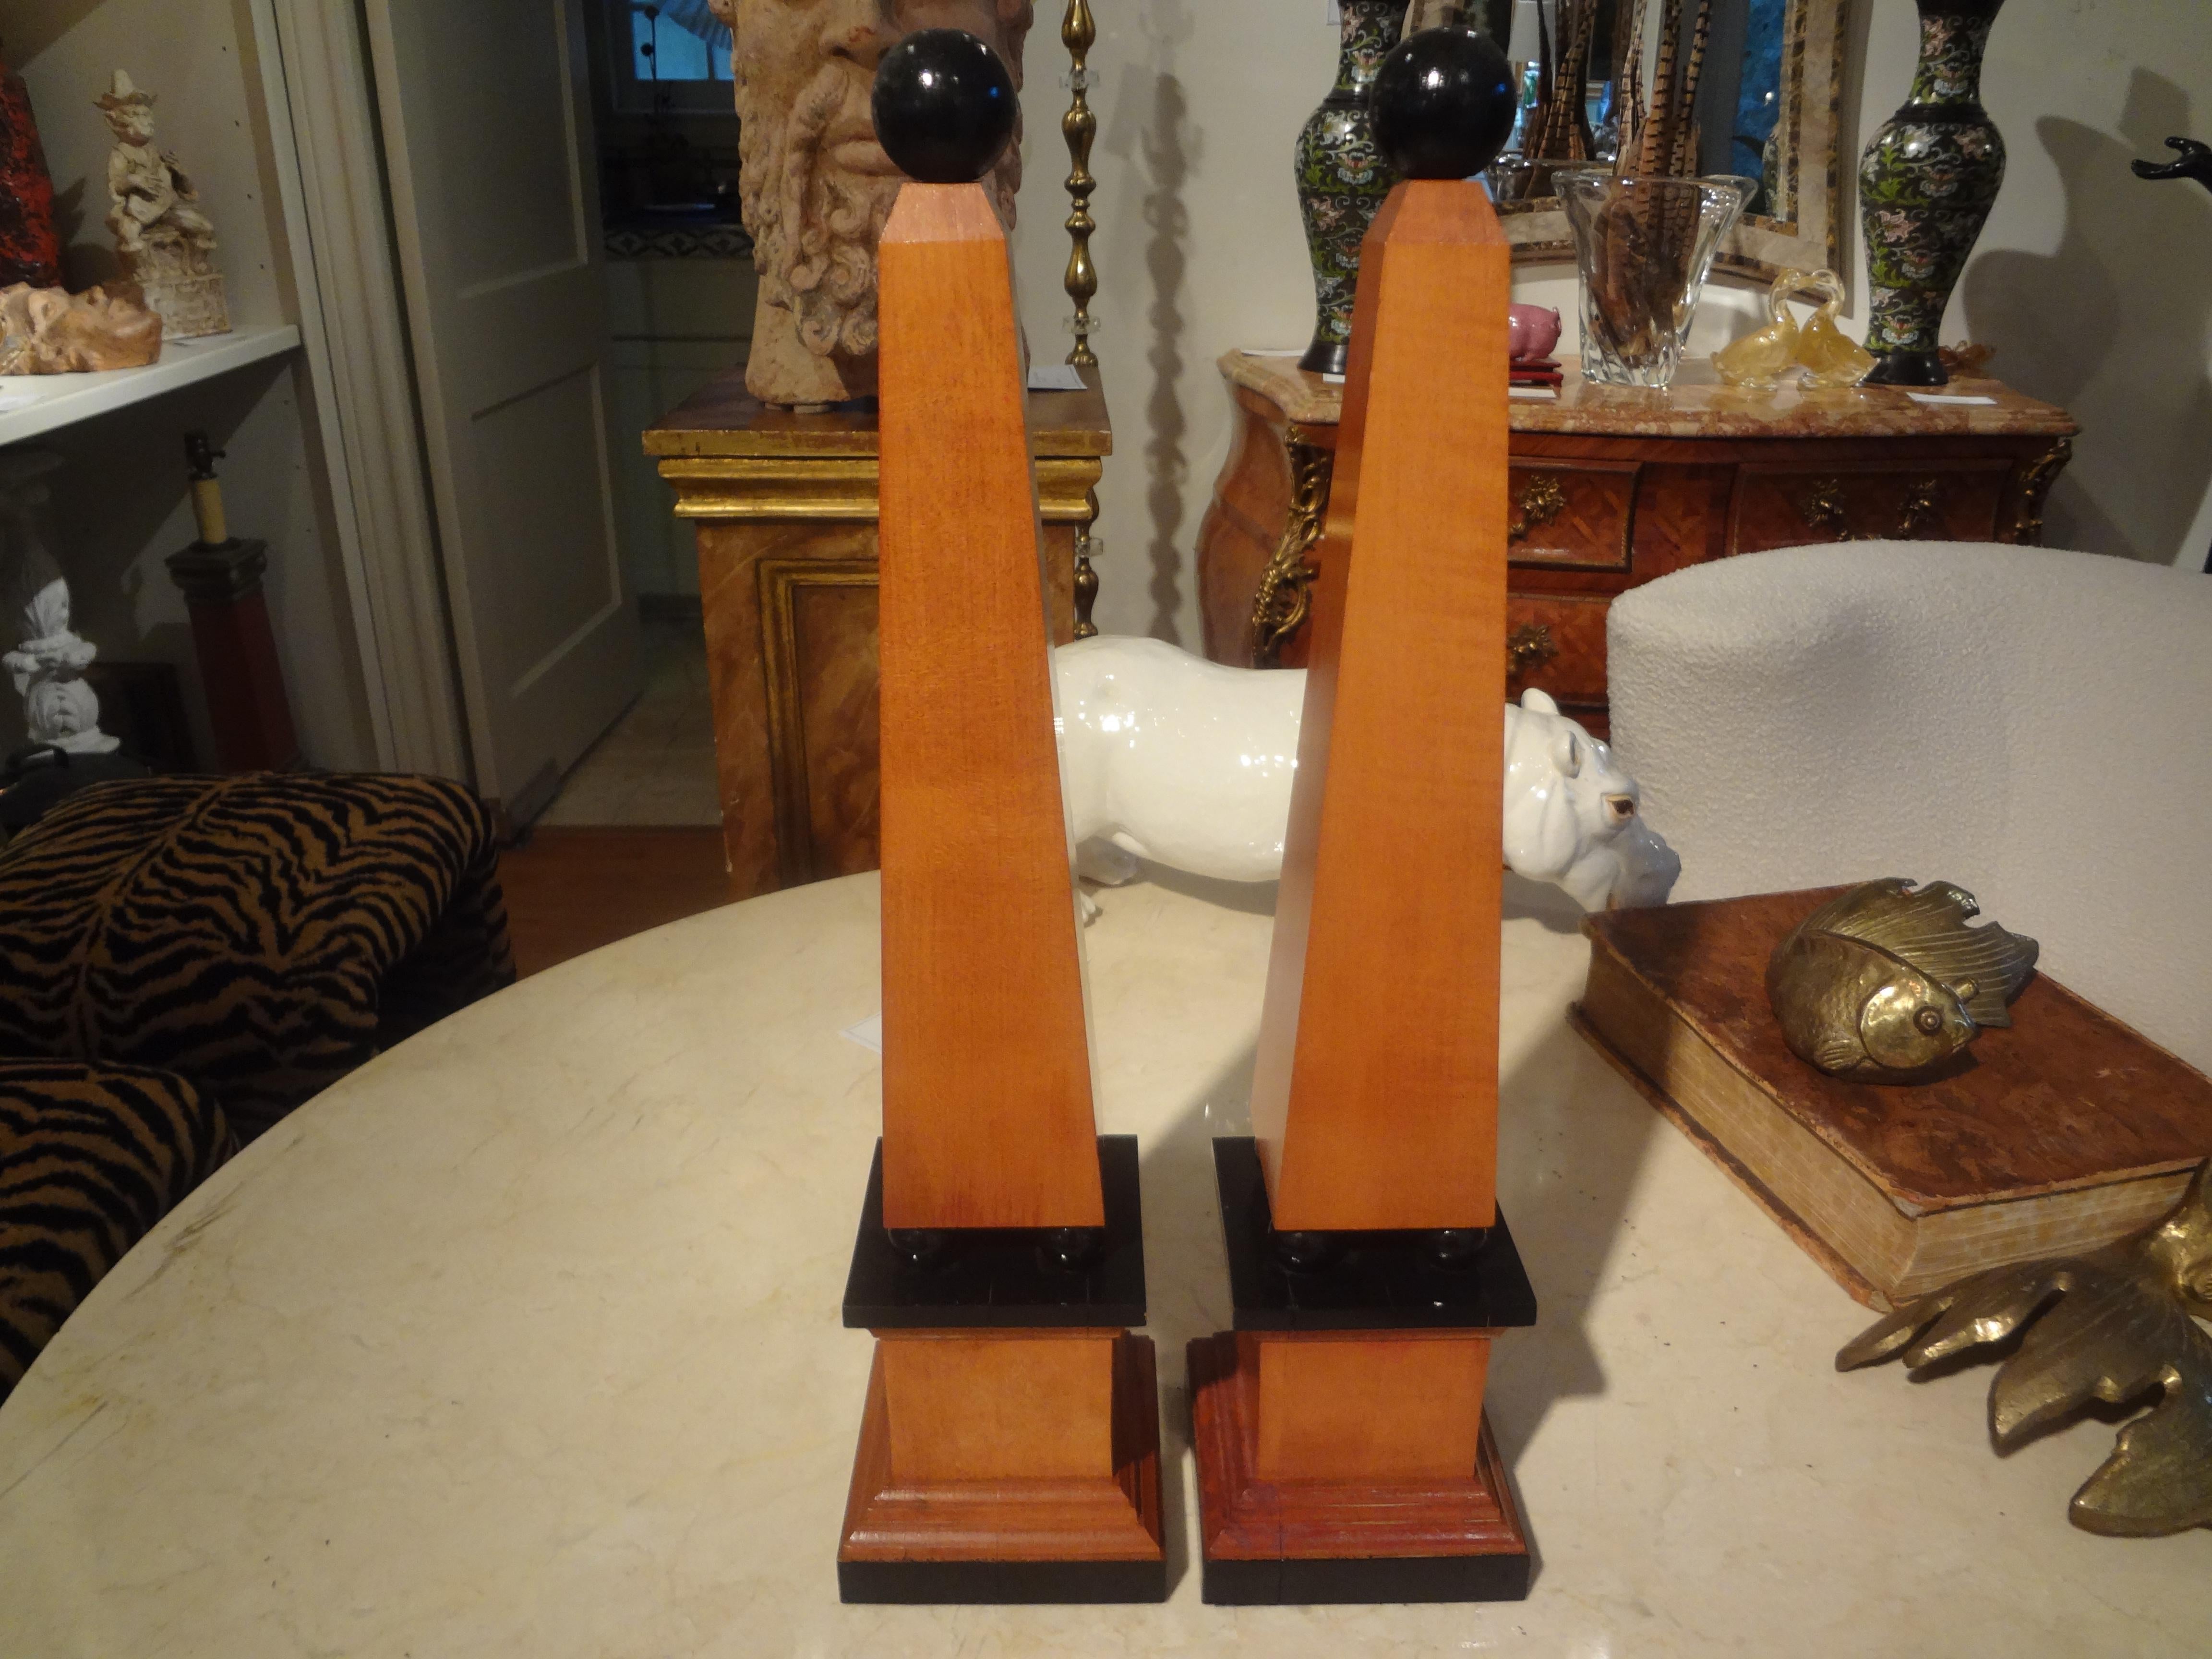 Pair of 20th Century Carved Wood Obelisks.
Handsome pair of 20th century Neoclassical style black and brown carved wood obelisks.
This listing is for a pair.